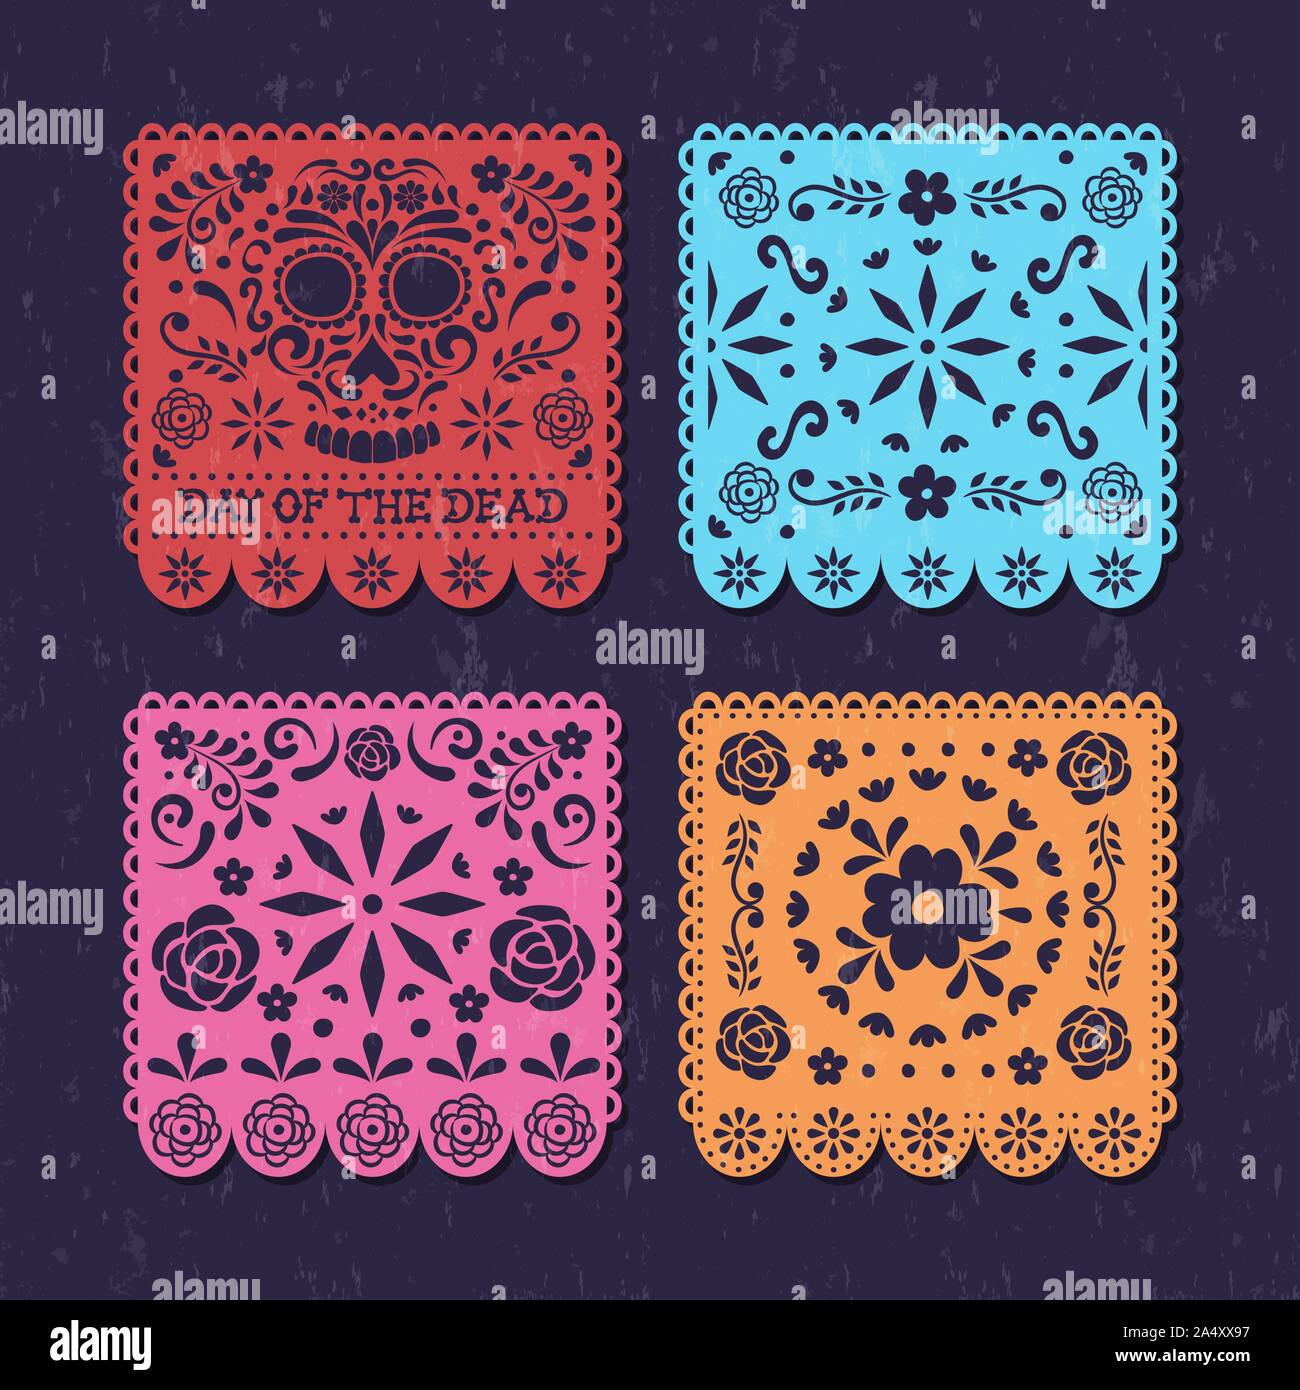 Day of the dead papercut banner set for traditional mexican holiday event. Papel picado art collection with skulls and flowers. Stock Vector